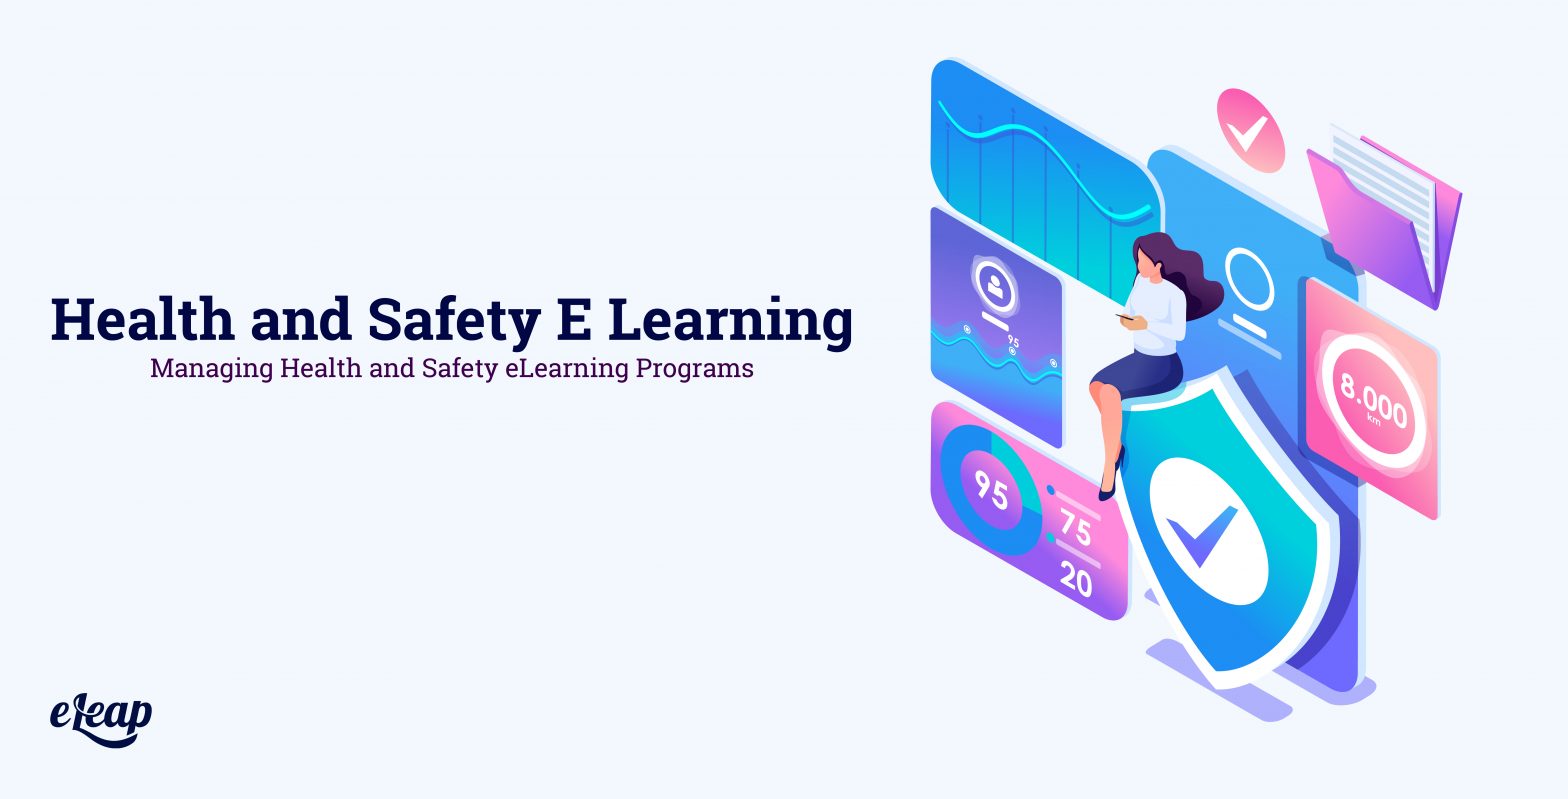 Health and Safety E Learning